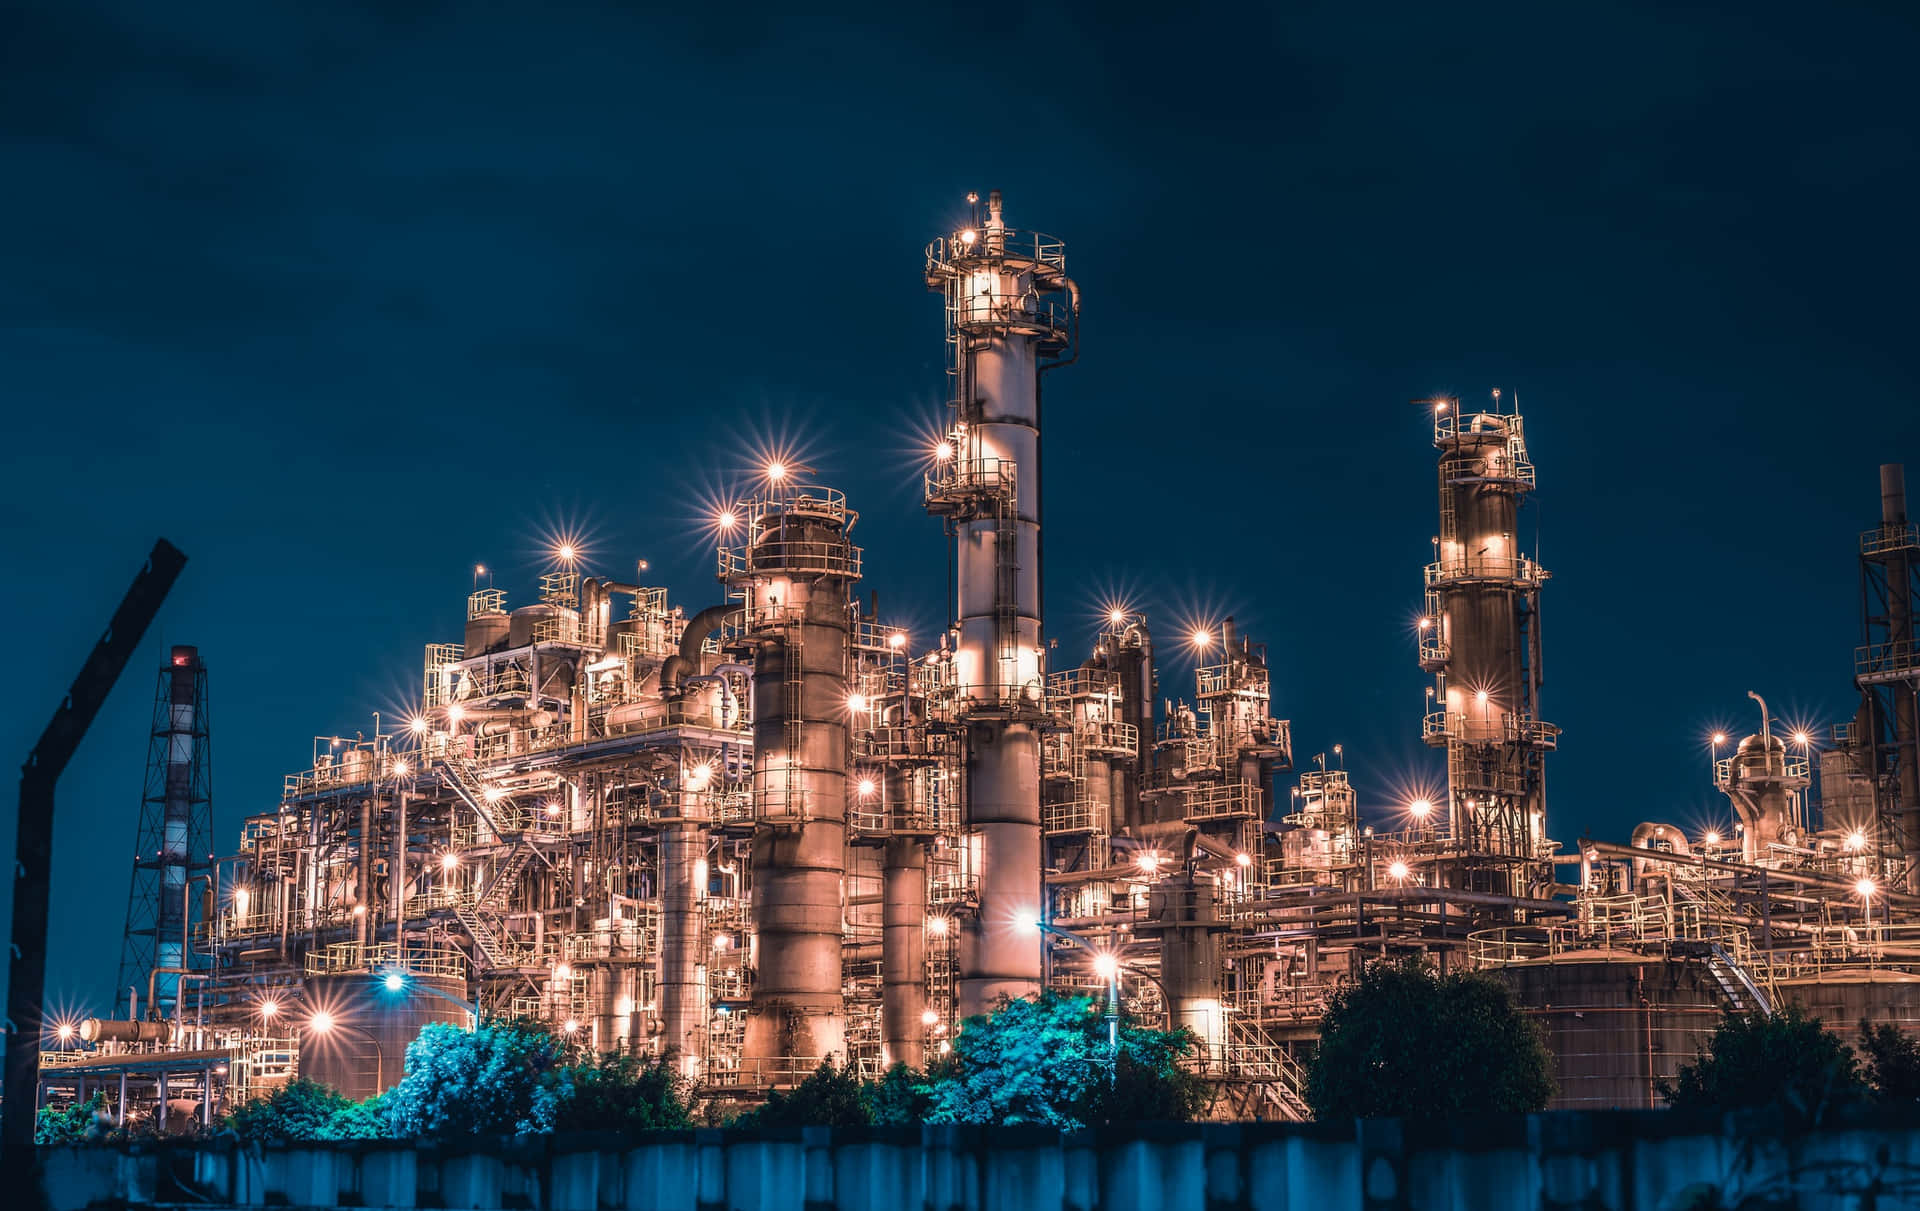 A Large Refinery At Night With Lights On